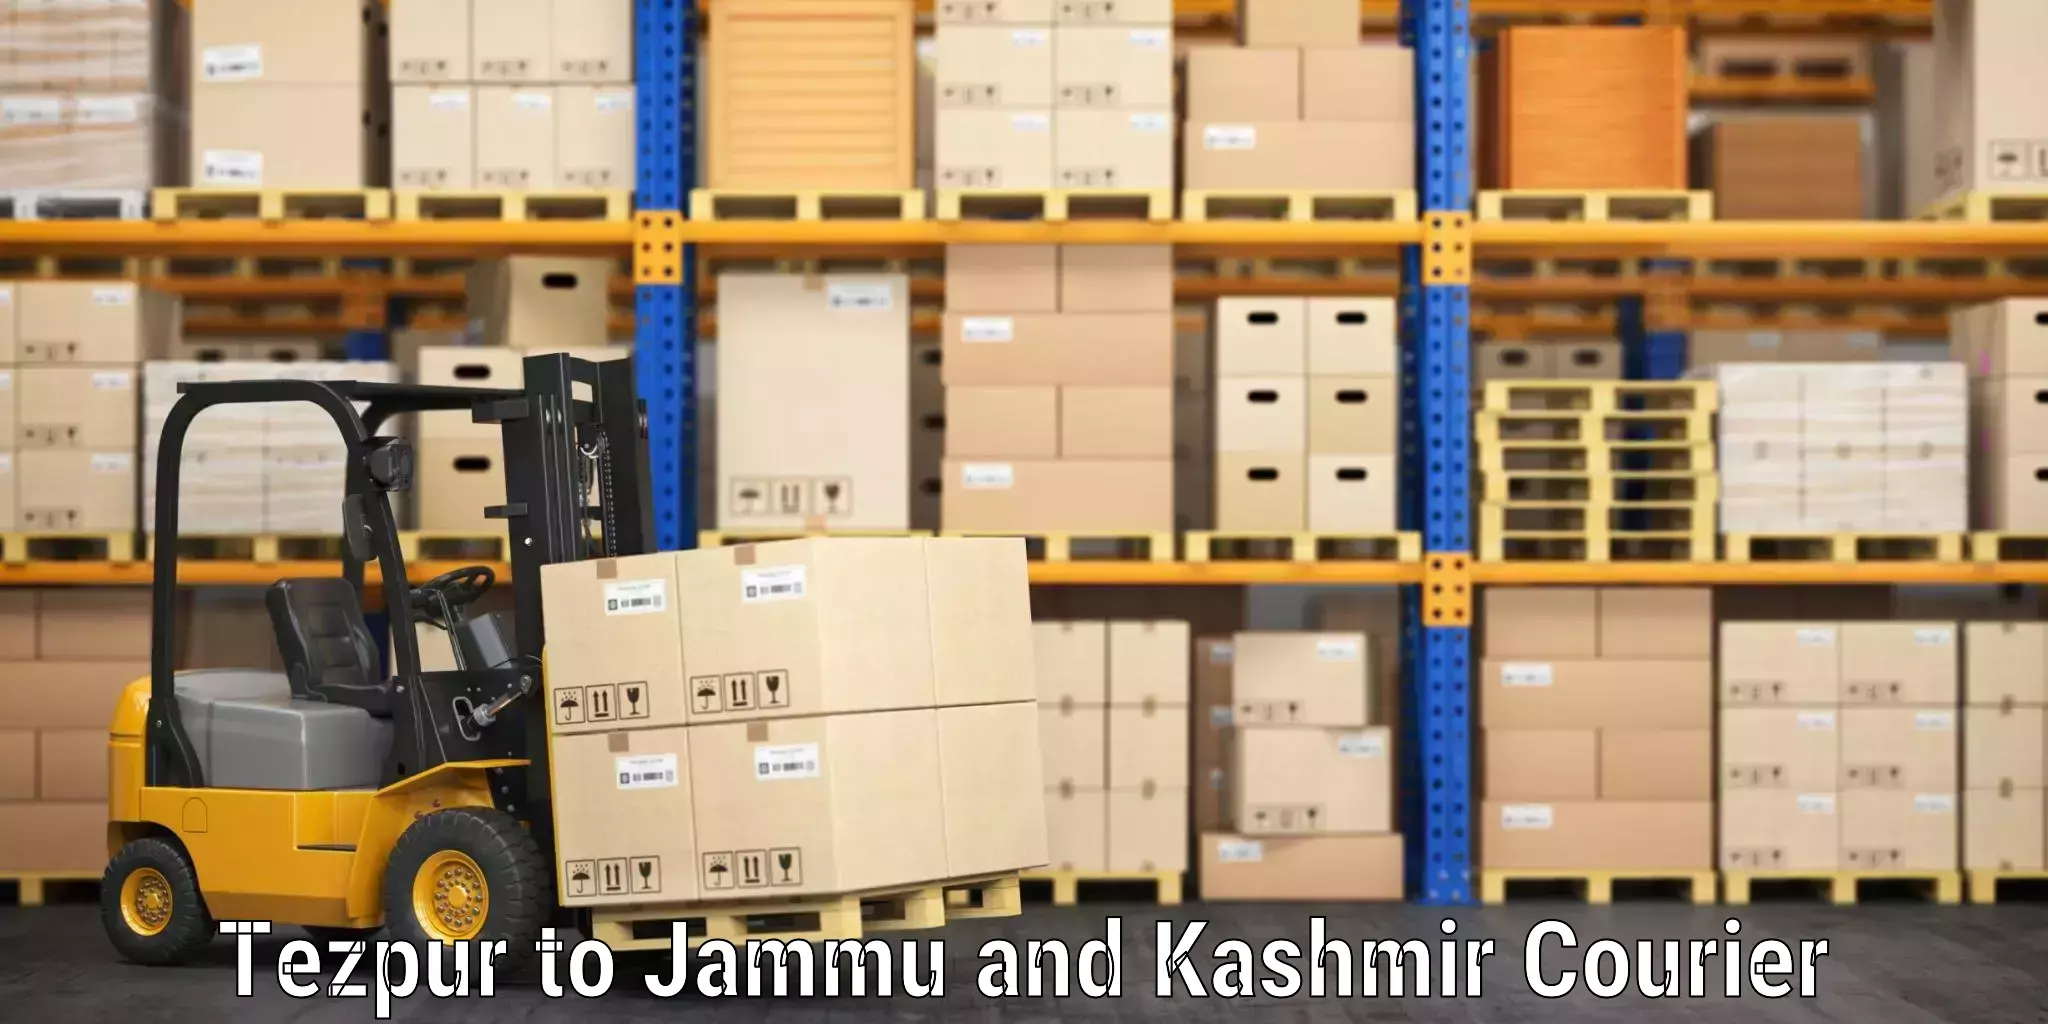 Automated luggage transport in Tezpur to Jammu and Kashmir